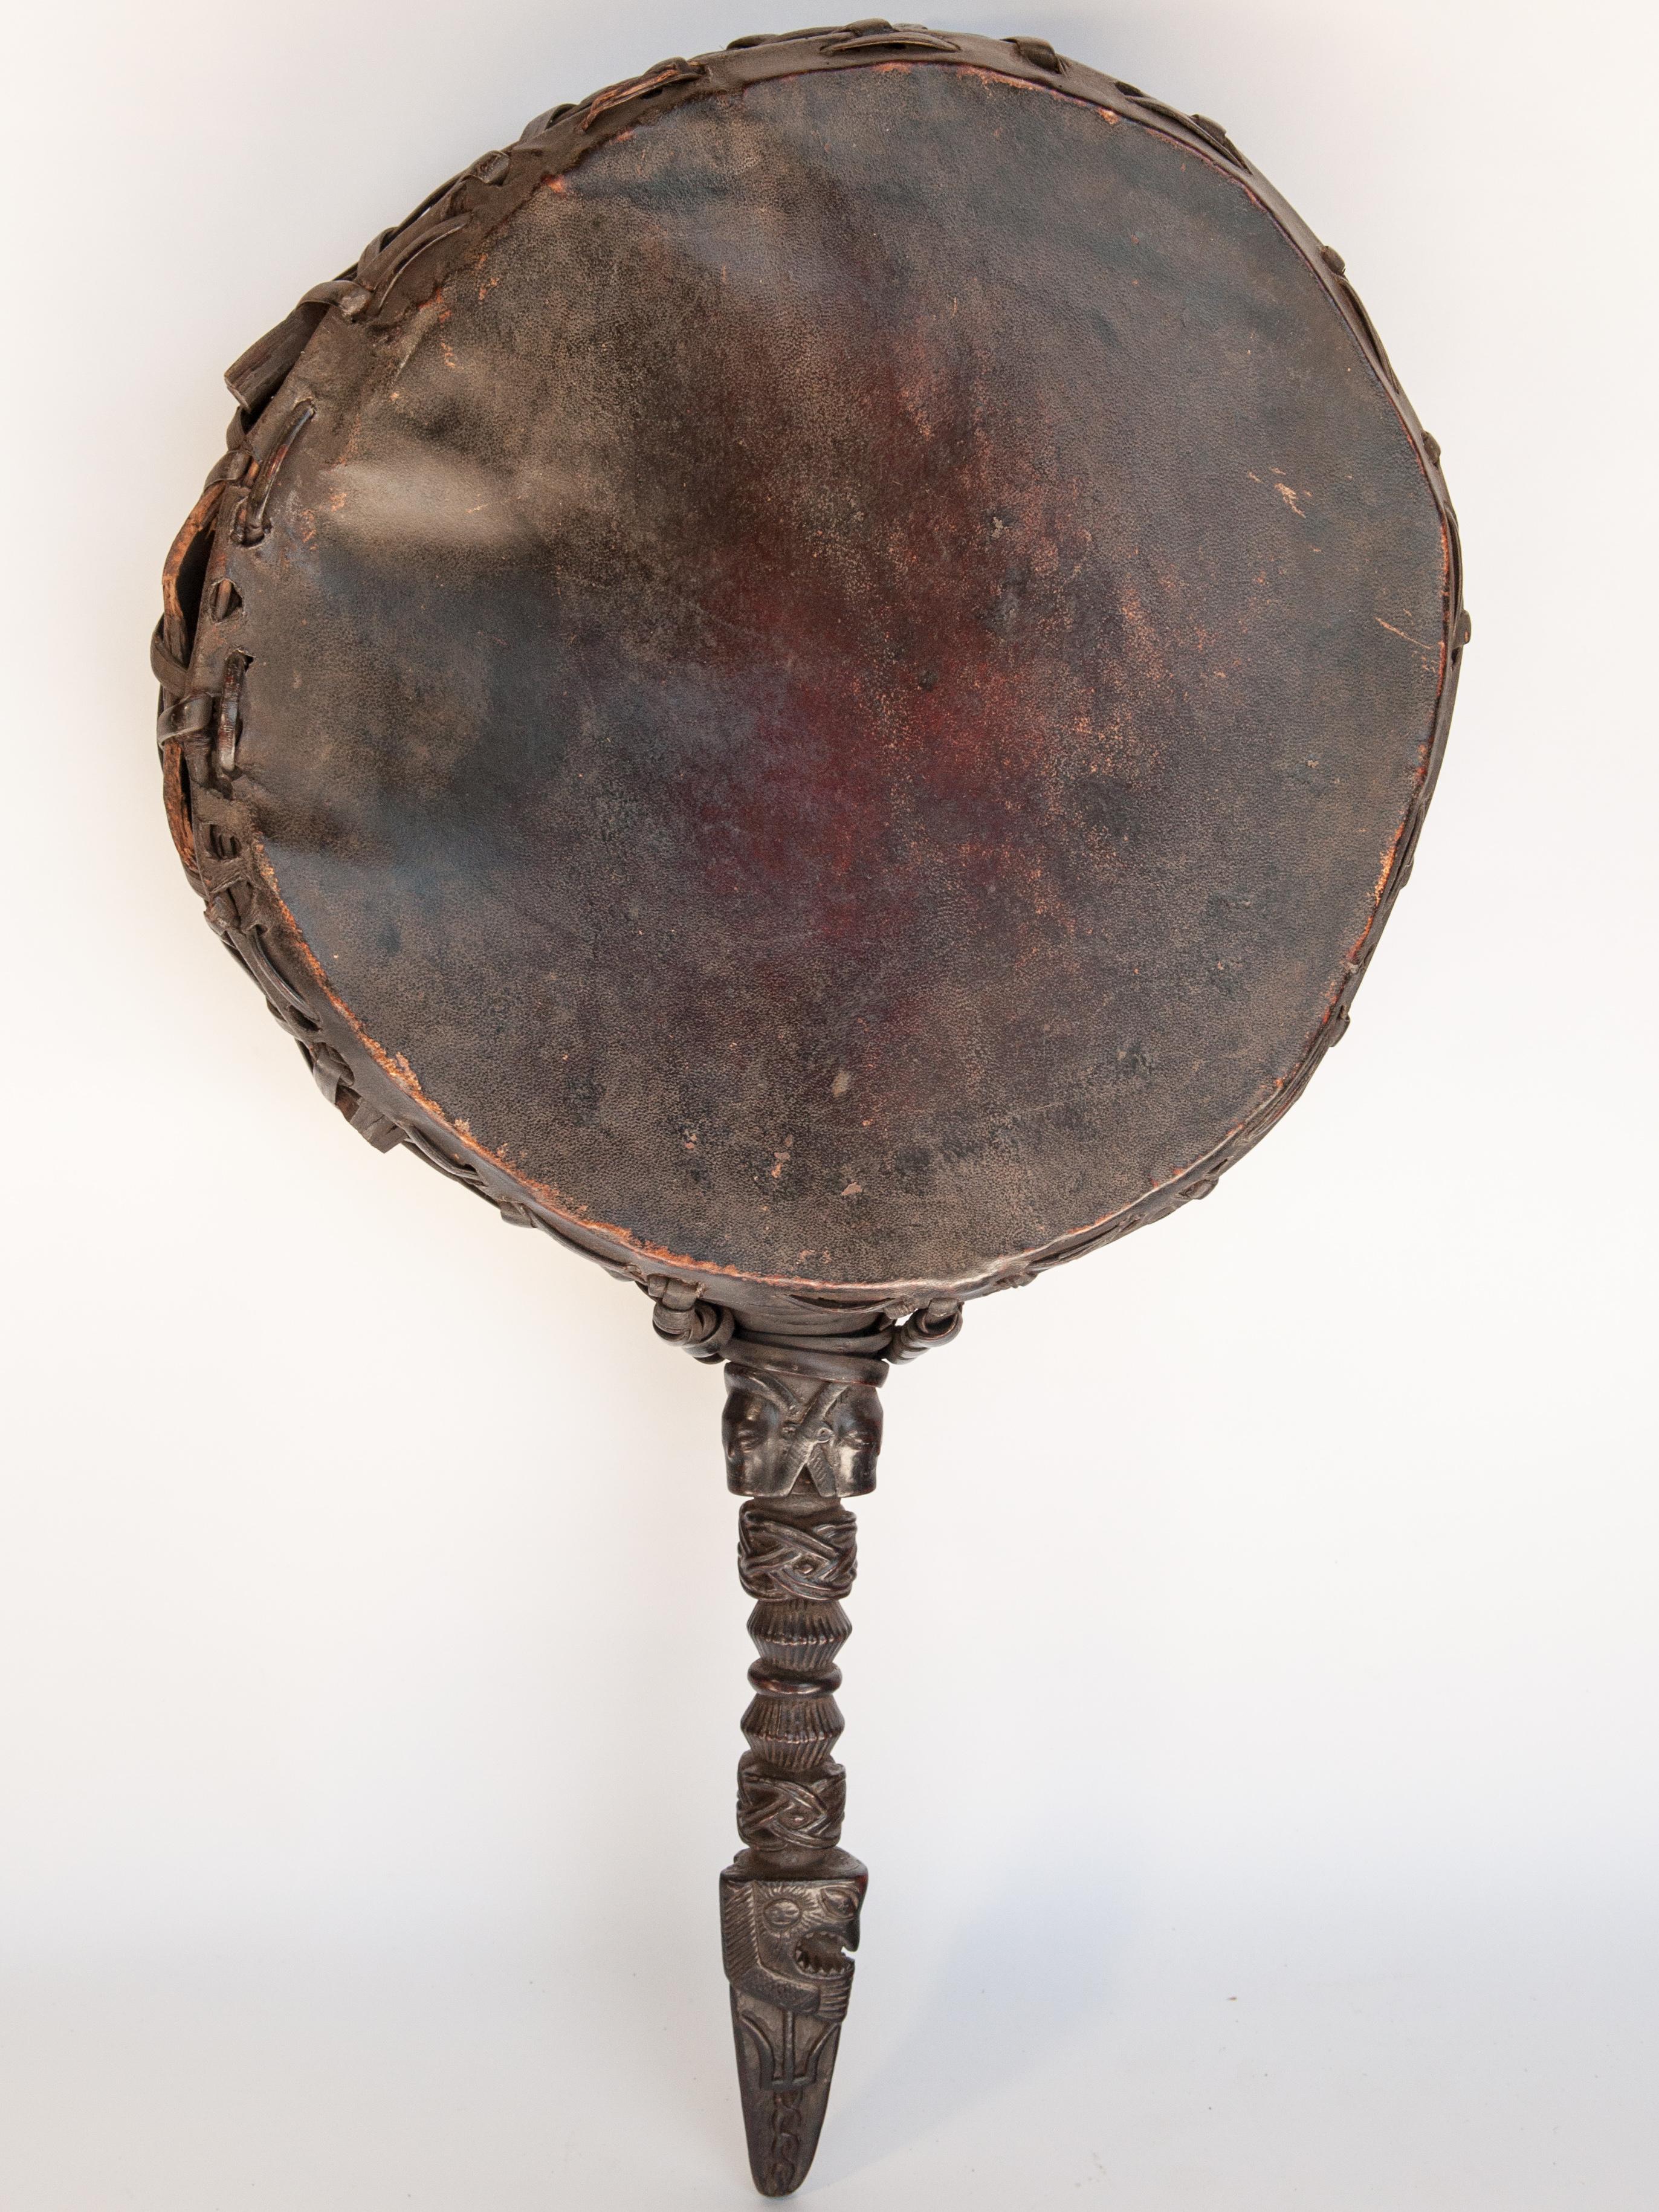 Hide Shaman Drum, Carved Wooden Handle, Nepal Himalaya, Mid-20th Century, on Stand